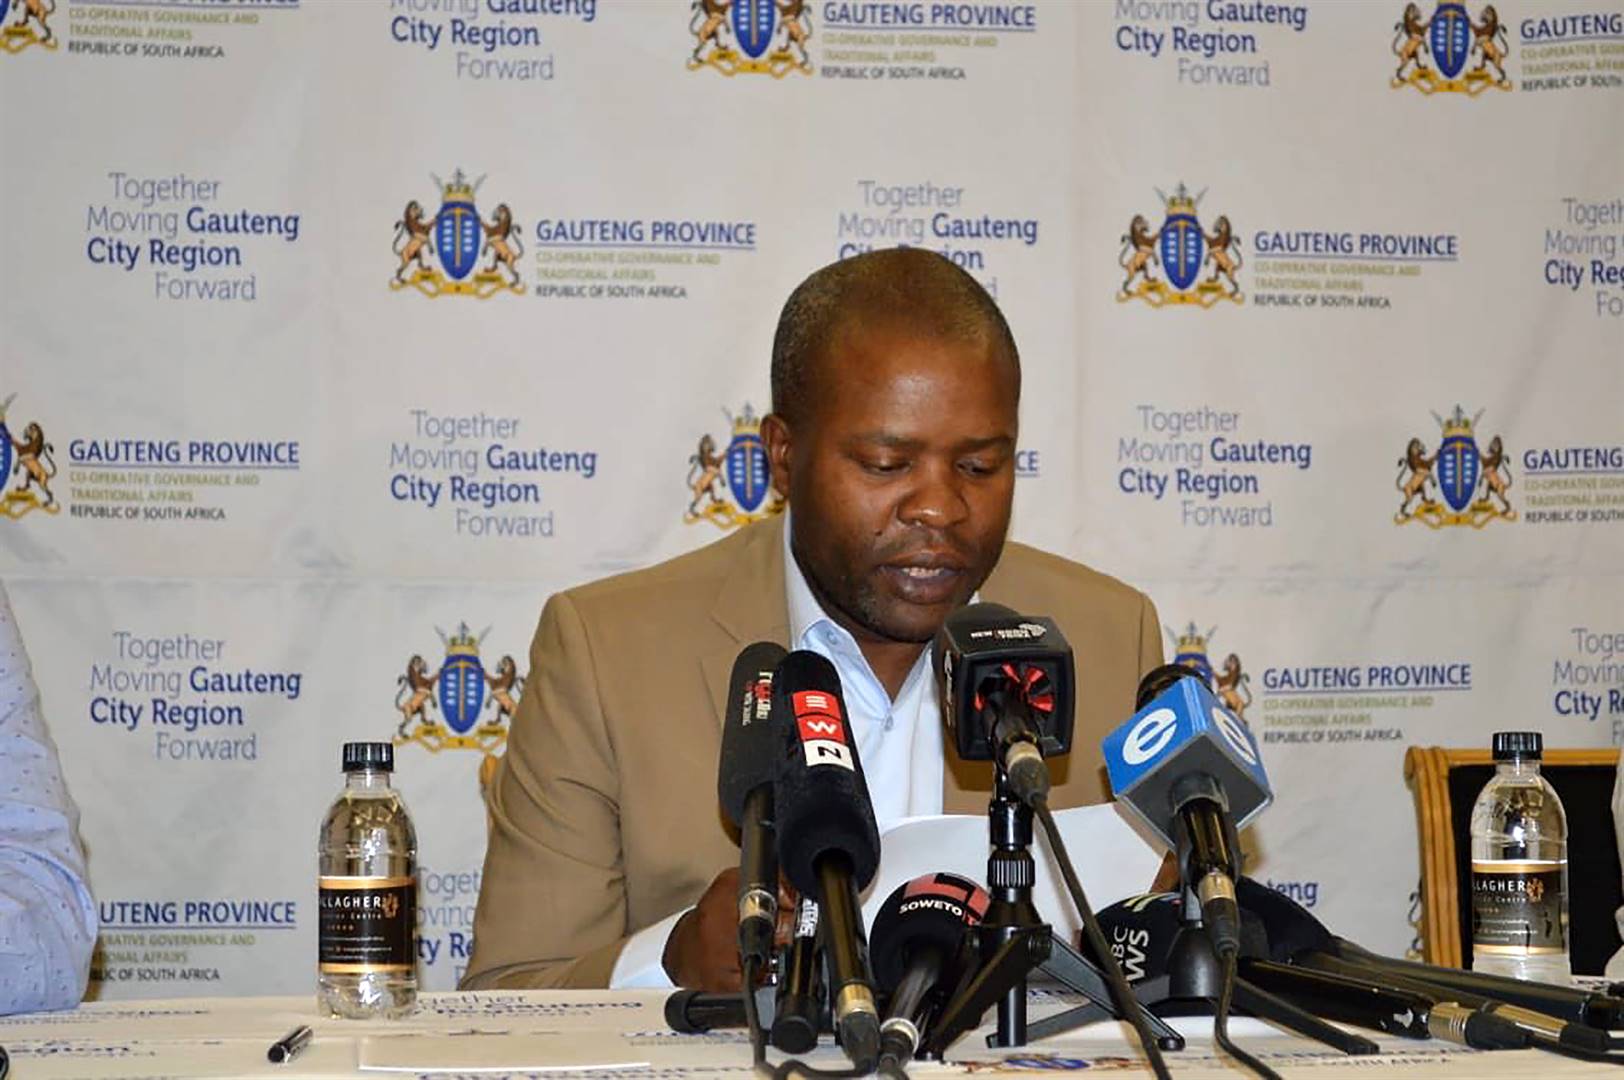 Gauteng MEC for Co-operative Governance and Traditional Affairs, Lebogang Maile, dropped a bombshell yesterday (Thursday) after the suspension of Tshwane Council speaker, Katlego Mathebe, and City of Johannesburg speaker Vasco Da Gama. 